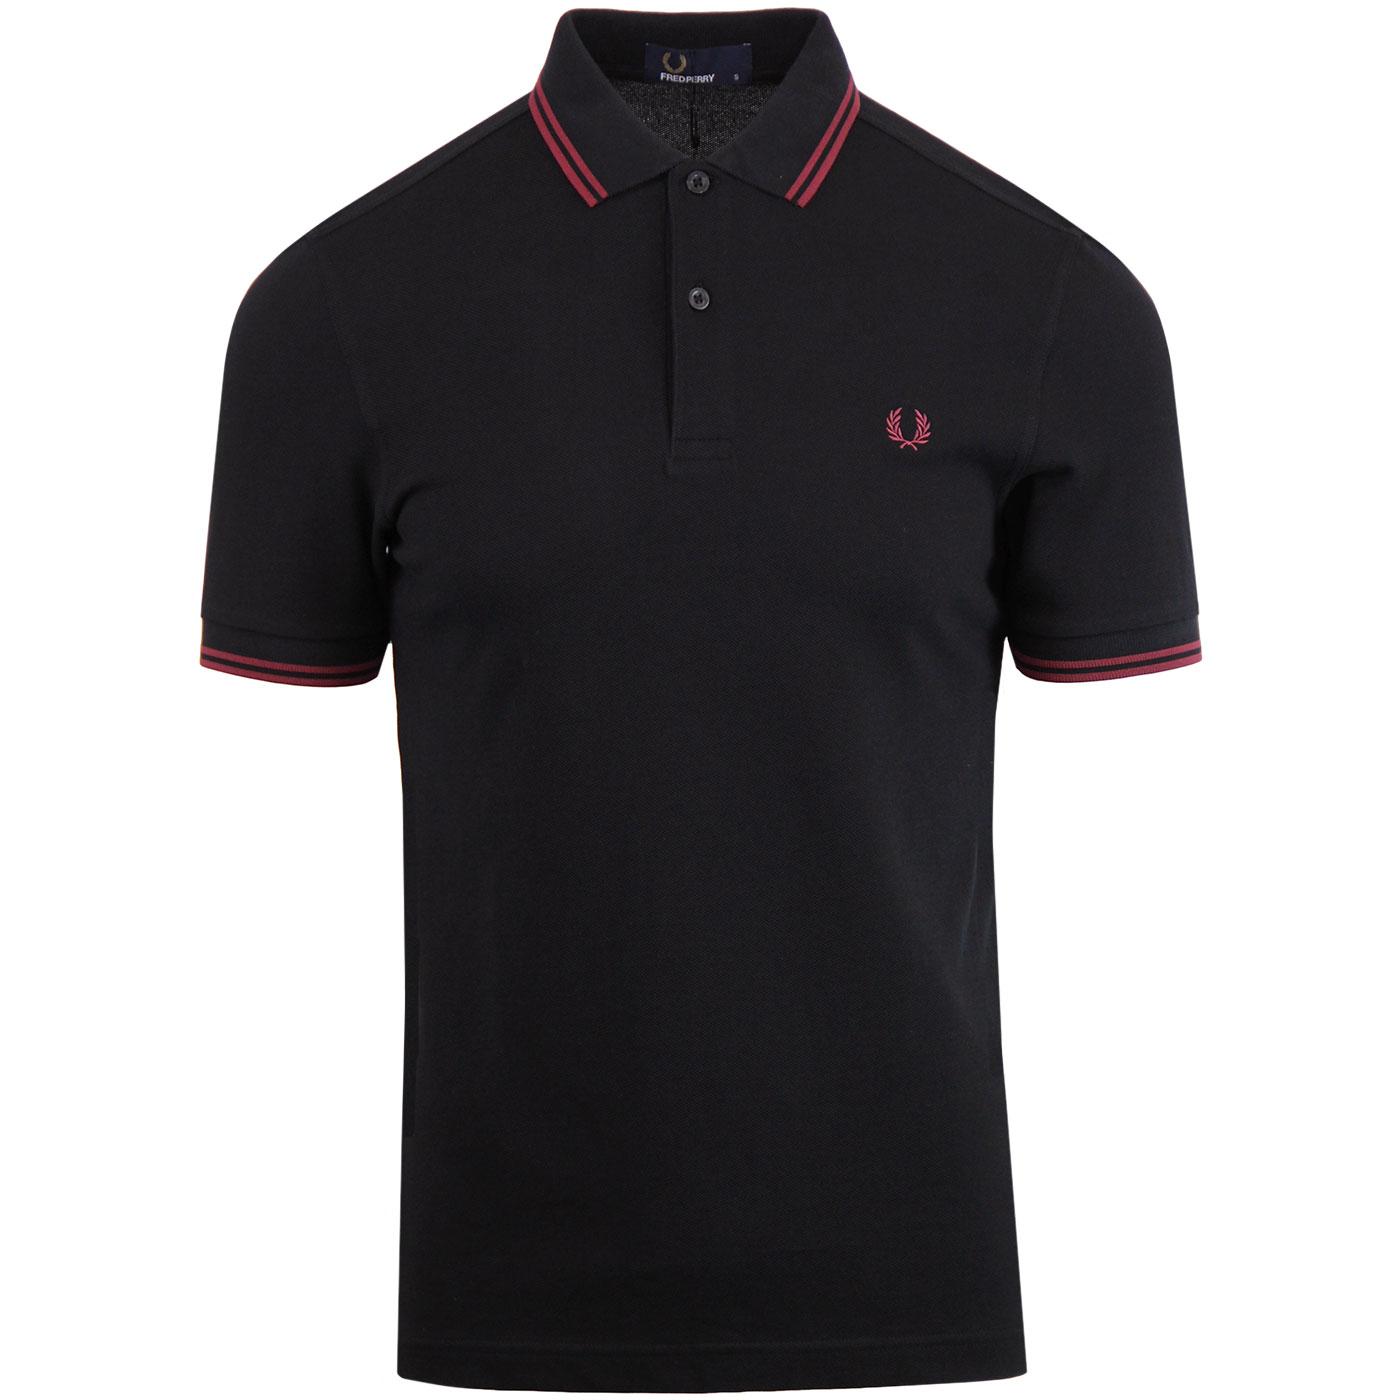 FRED PERRY M3600 Mod Twin Tipped Polo Top in Black/Berry